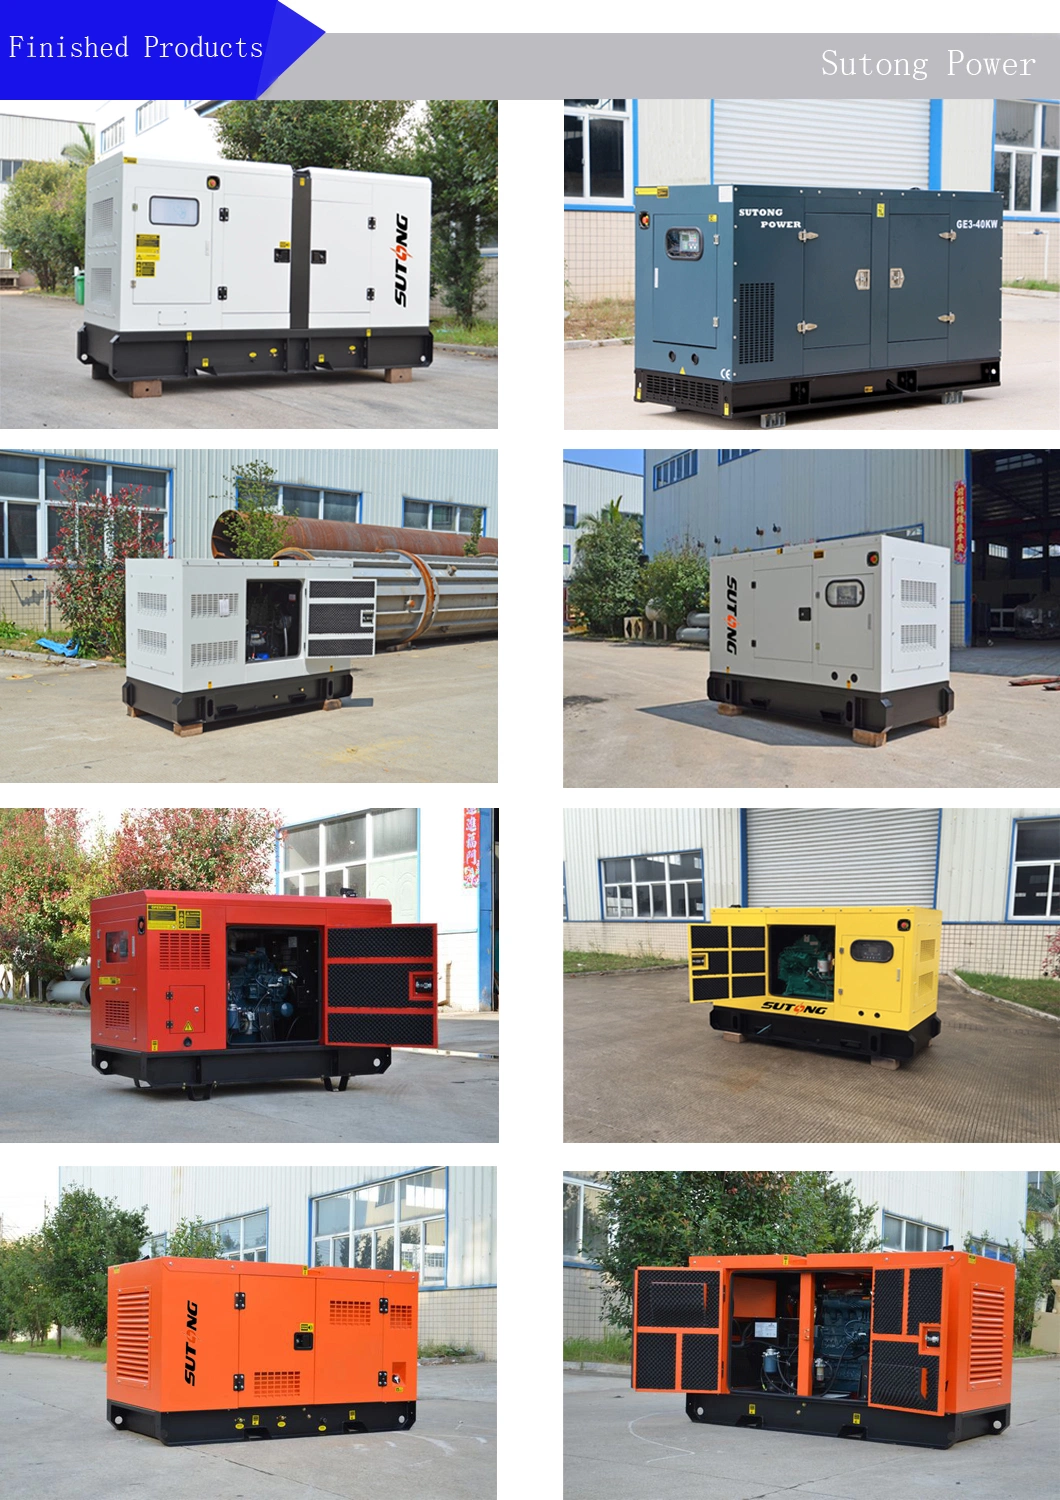 9.0HP/3600rmp Air Cooled Movable/Portable Silent Diesel Generator with 5kVA Diesel Engine De186fae for Home Use